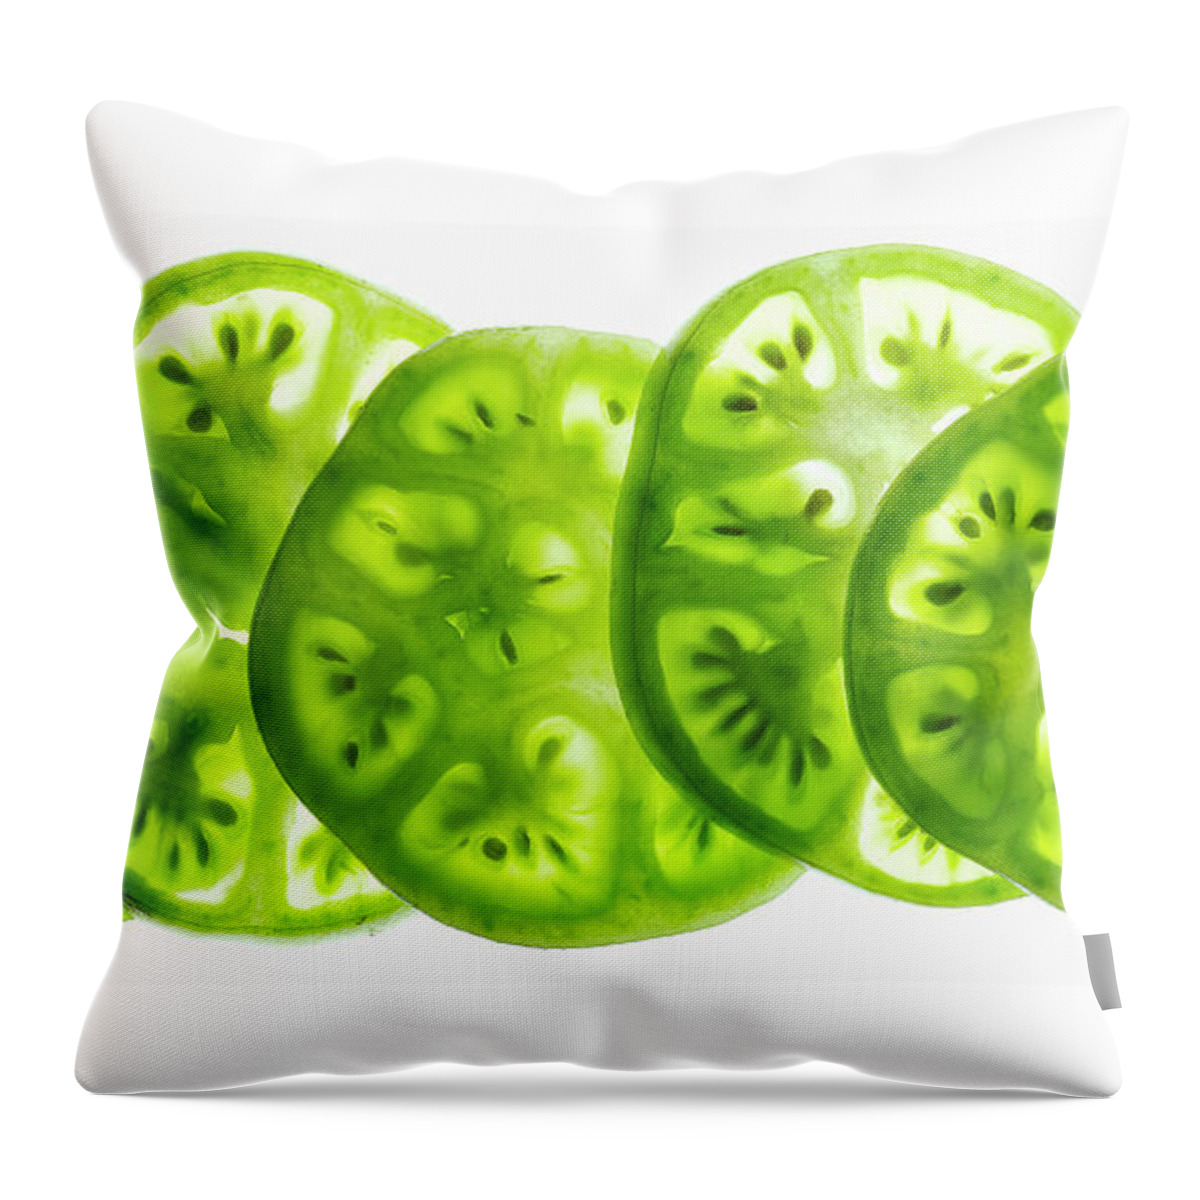 Five Objects Throw Pillow featuring the photograph Green Tomato Slices On A White by Howard Bjornson